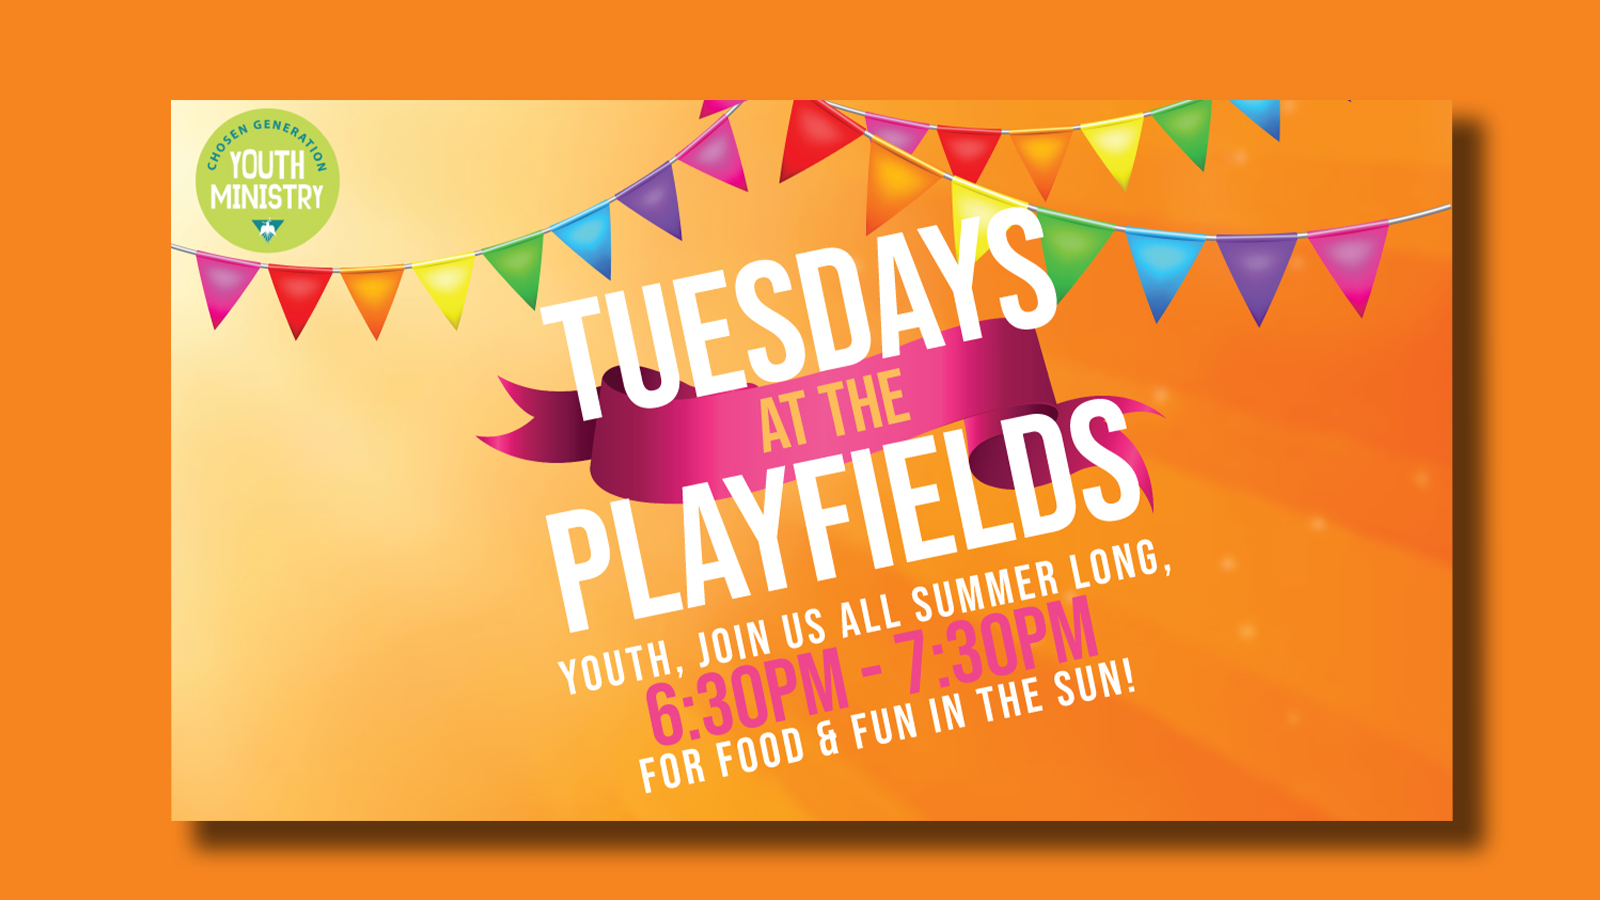 Tuesdays at the playfields